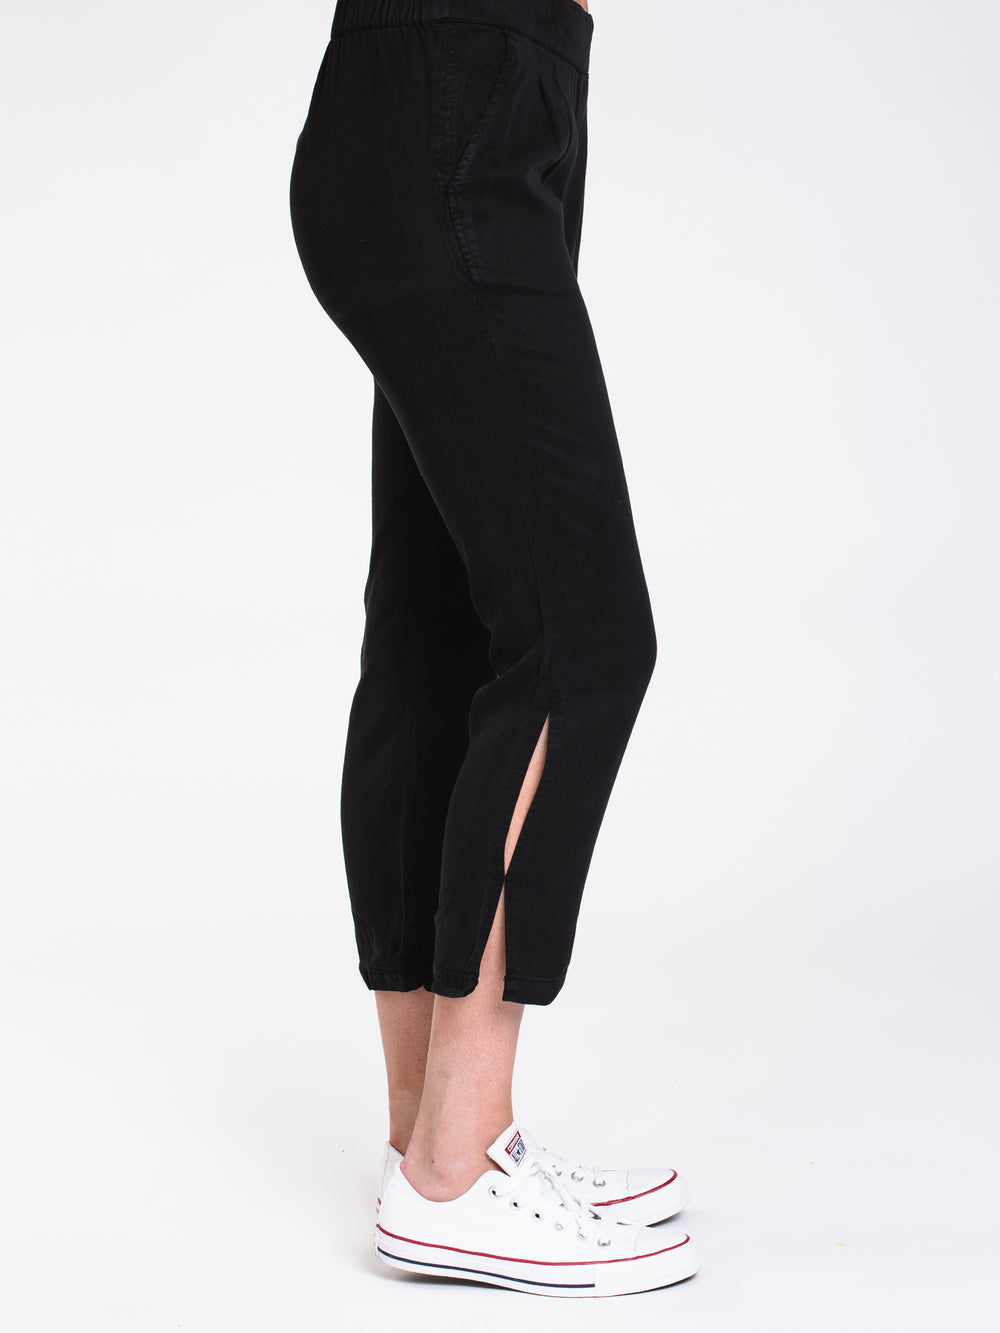 WOMENS LANGFORD 7/8 PANT - BLACK - CLEARANCE